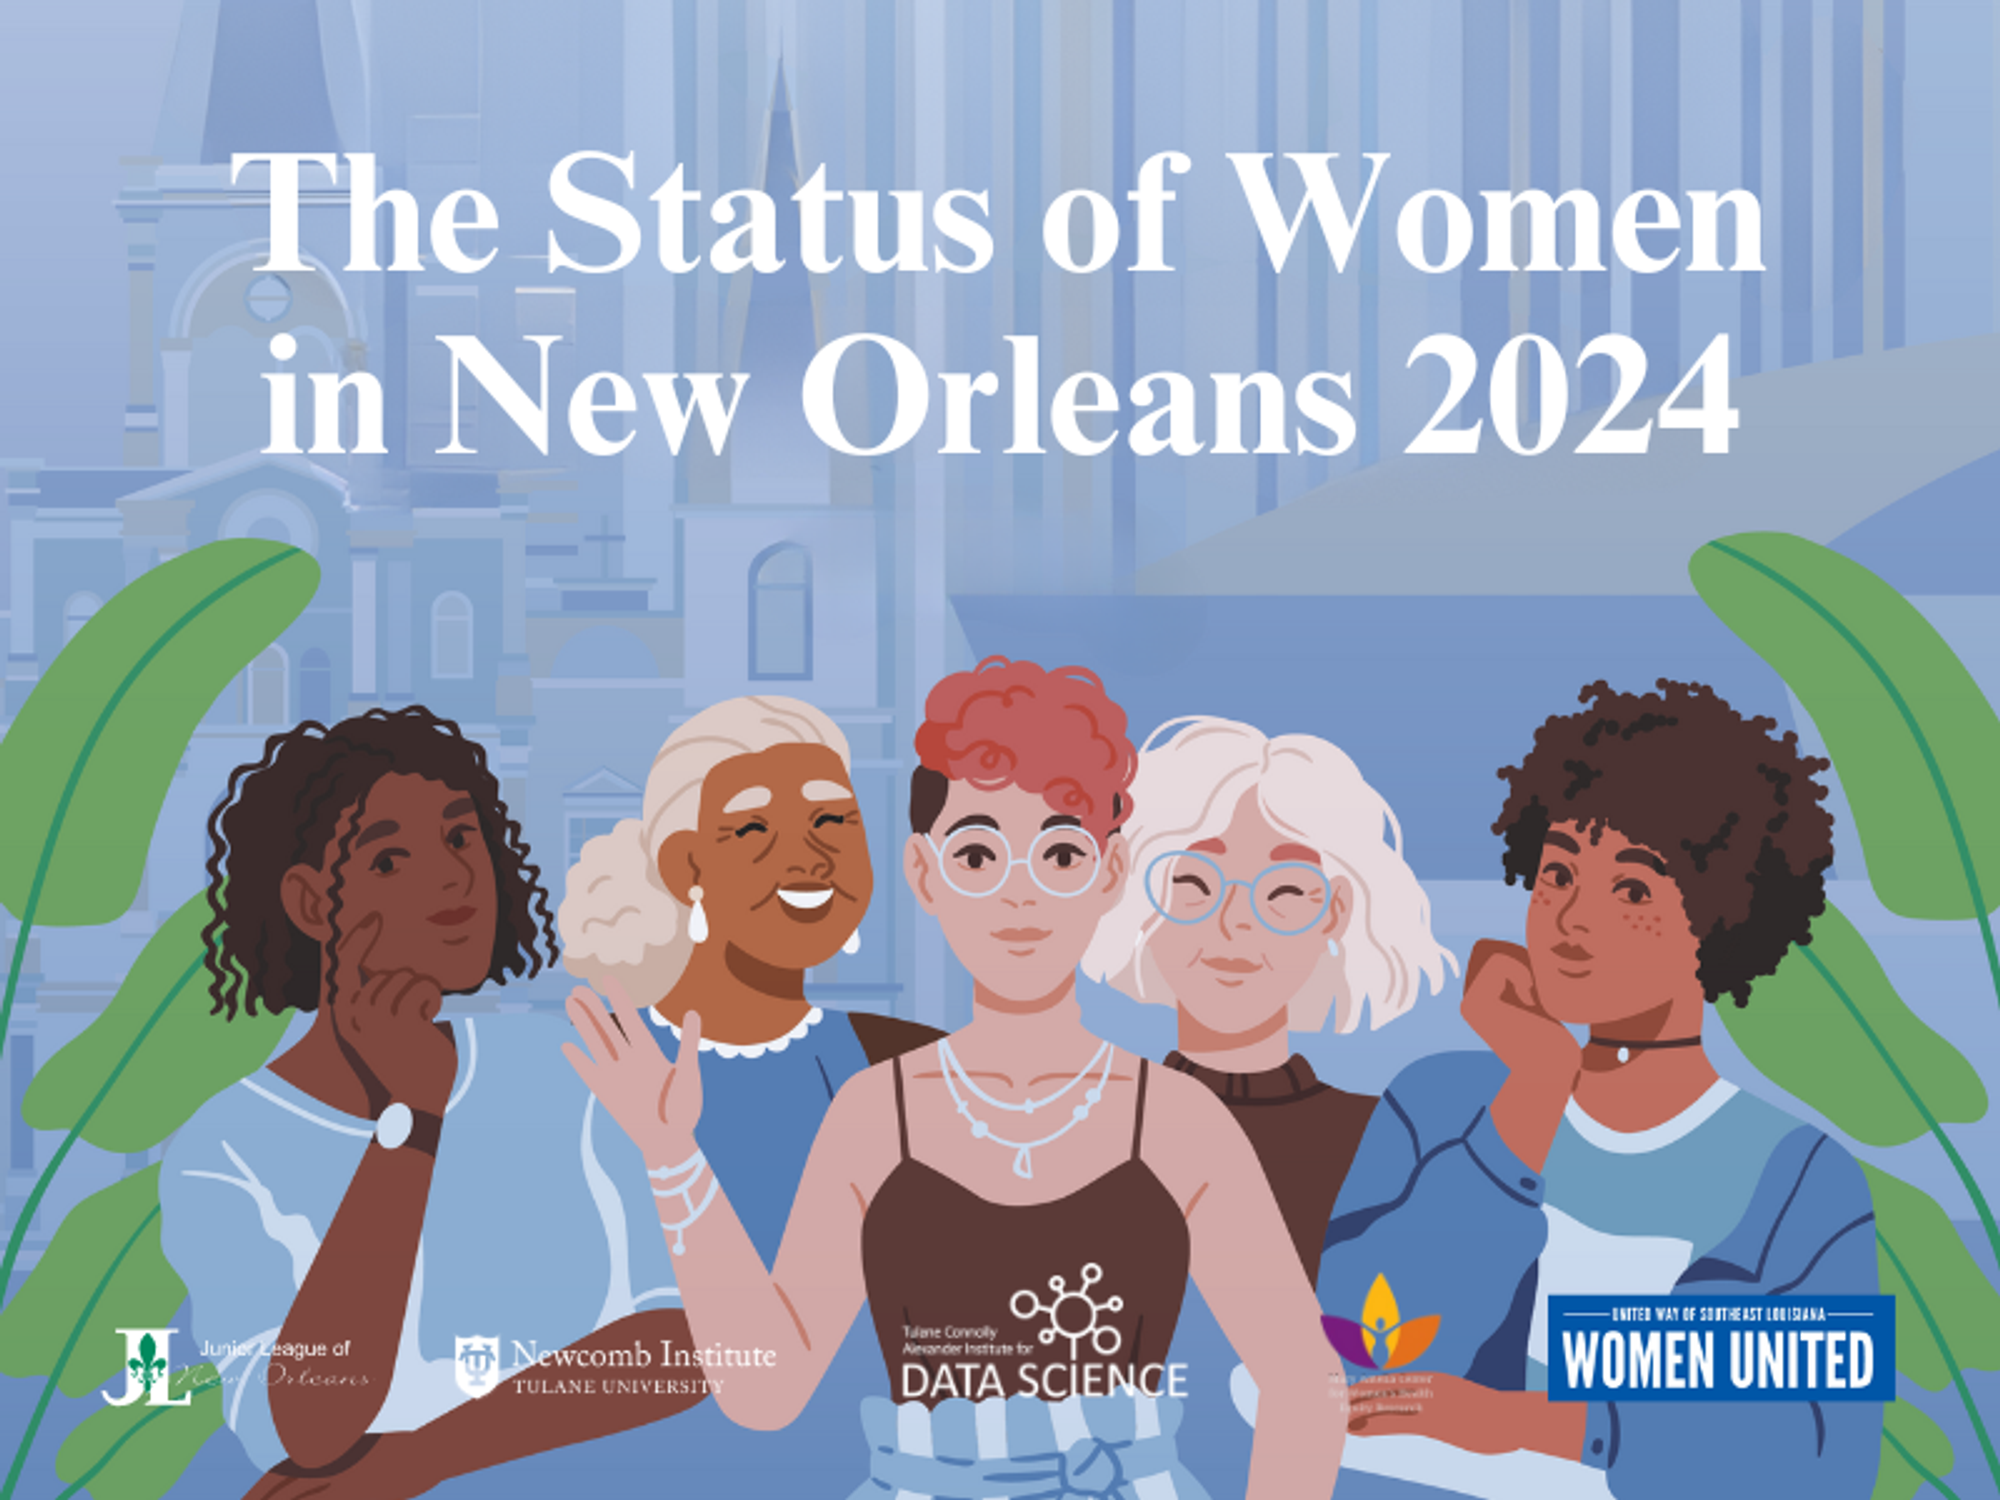 A diverse gorup of cartoon women stand under "The status of women in New Orleans 2024" with plants behind them.